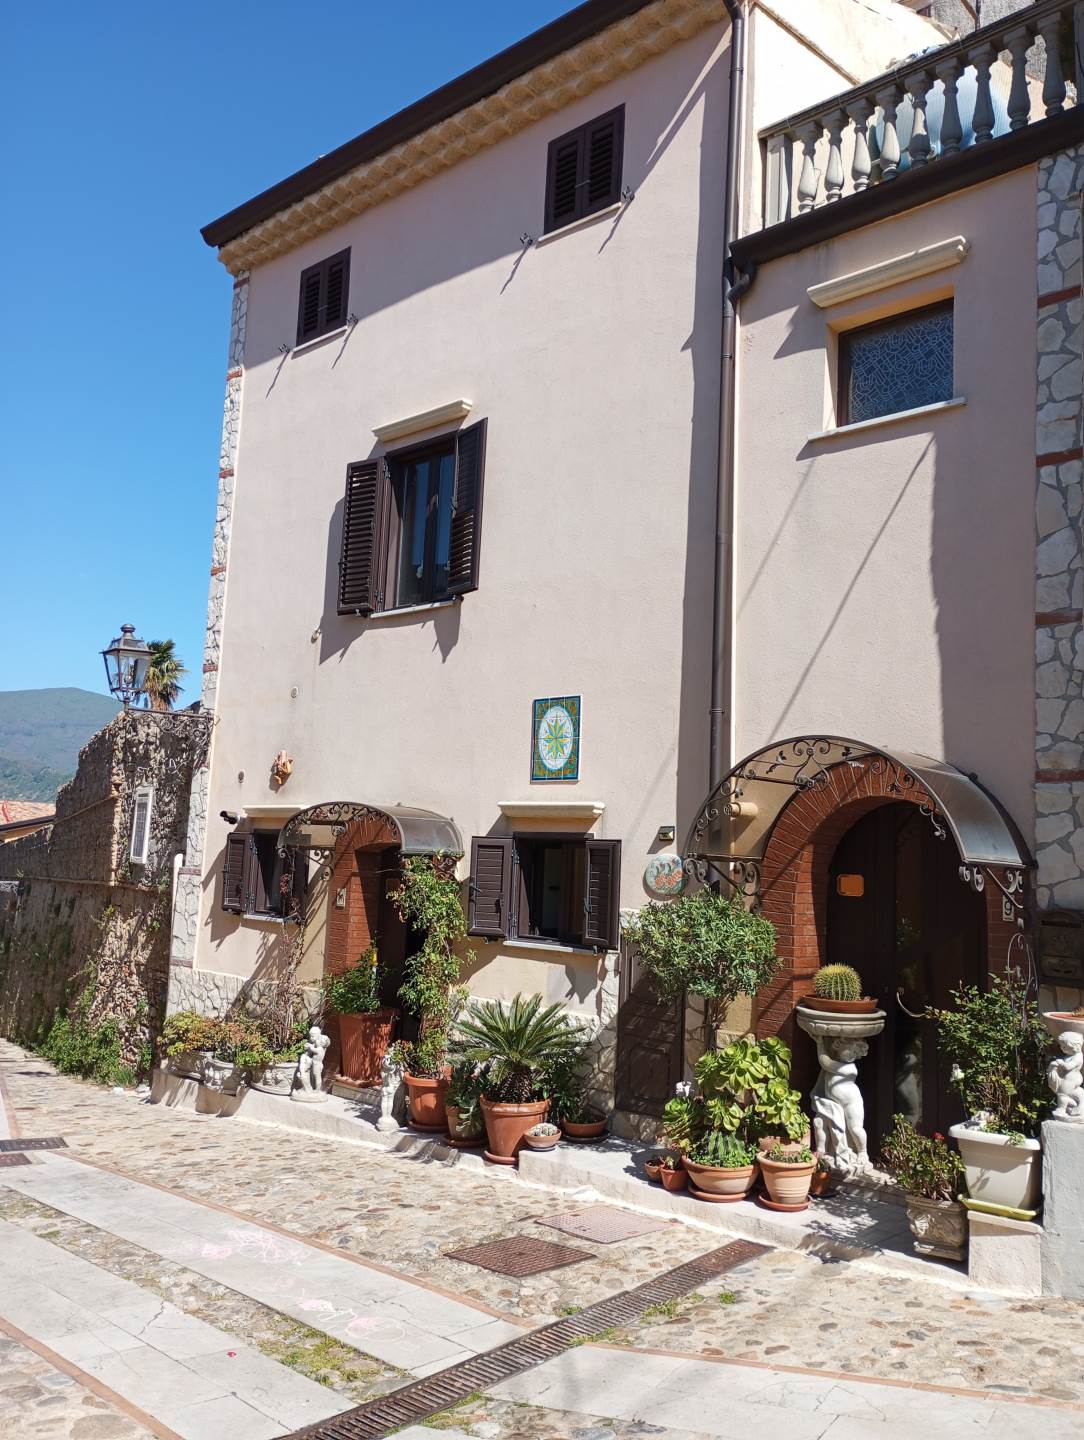 MONTALTO UFFUGO, Apartment for sale of 152 Sq. mt., Excellent Condition, Heating Individual heating system, composed by: 4 Rooms, Separate kitchen, , 